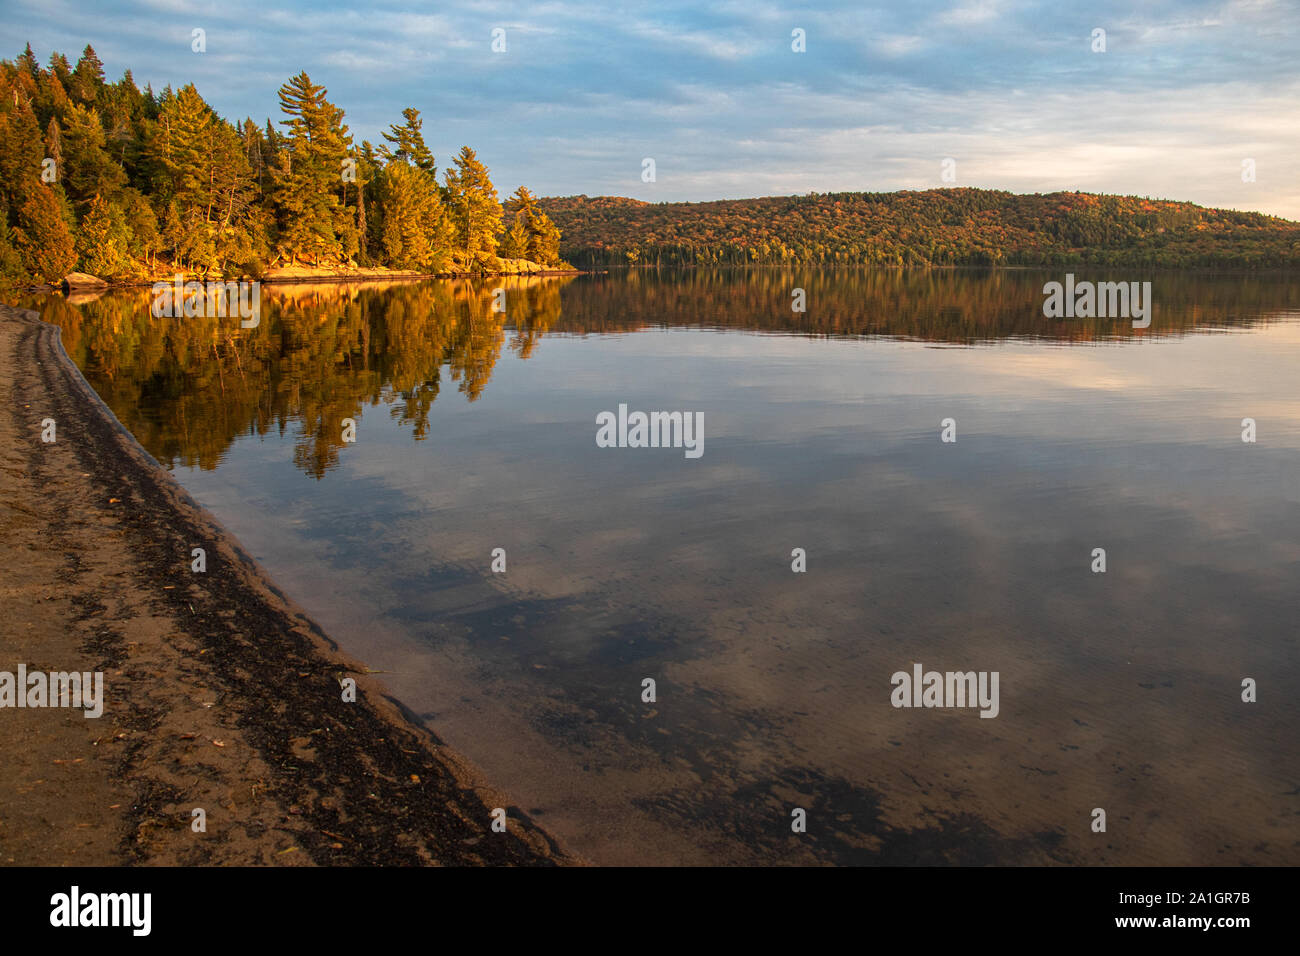 Golden light on forest along a calm lake at dusk in Autumn Stock Photo